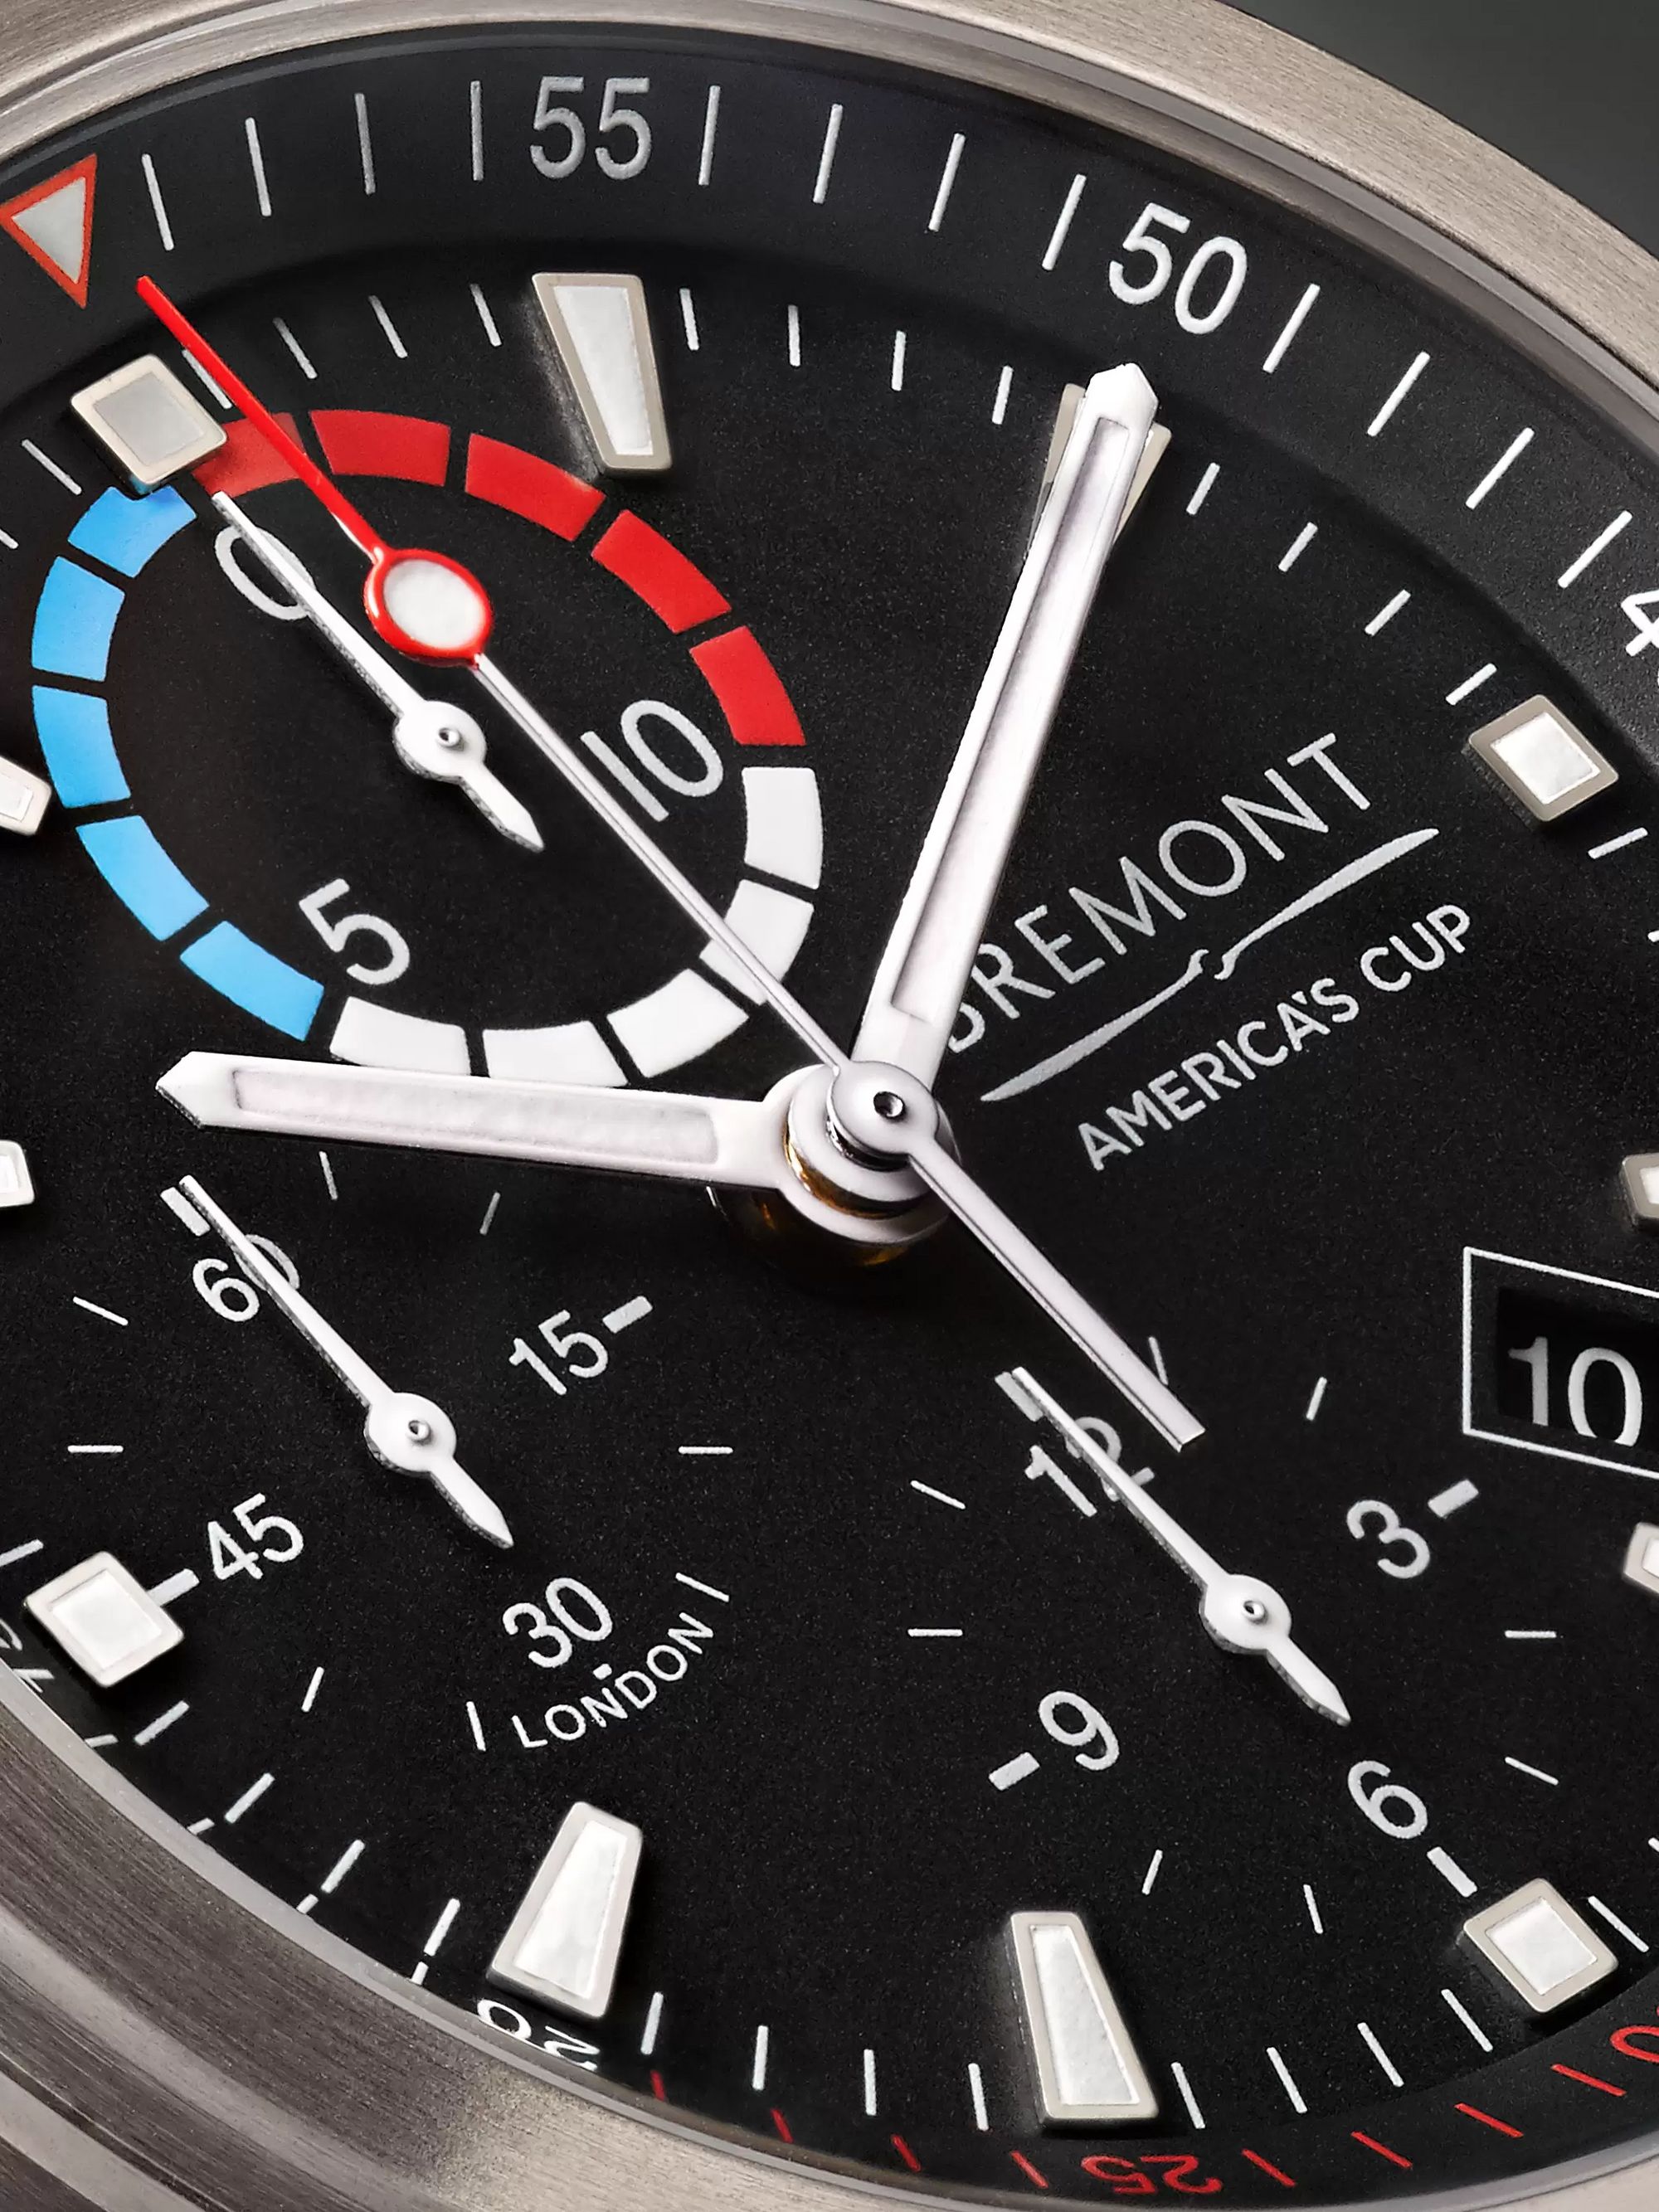 BREMONT AC-R-II America's Cup Automatic Regatta Chronograph 43mm Stainless Steel and Rubber Watch, Ref. No. 970380